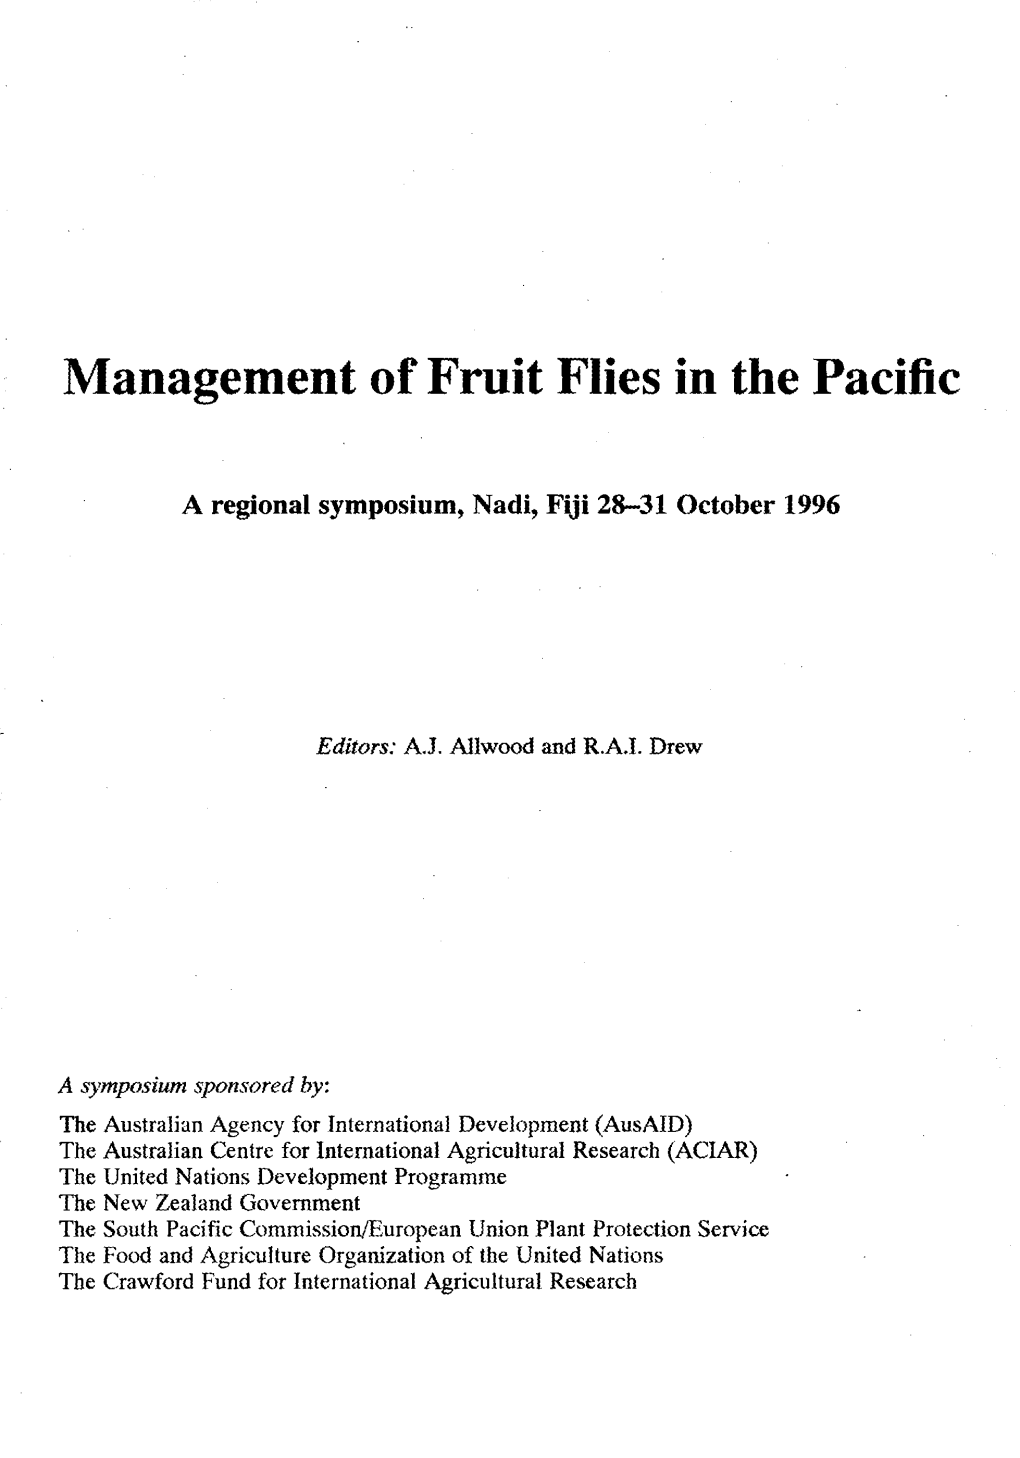 Management of Fruit Flies in the Pacific